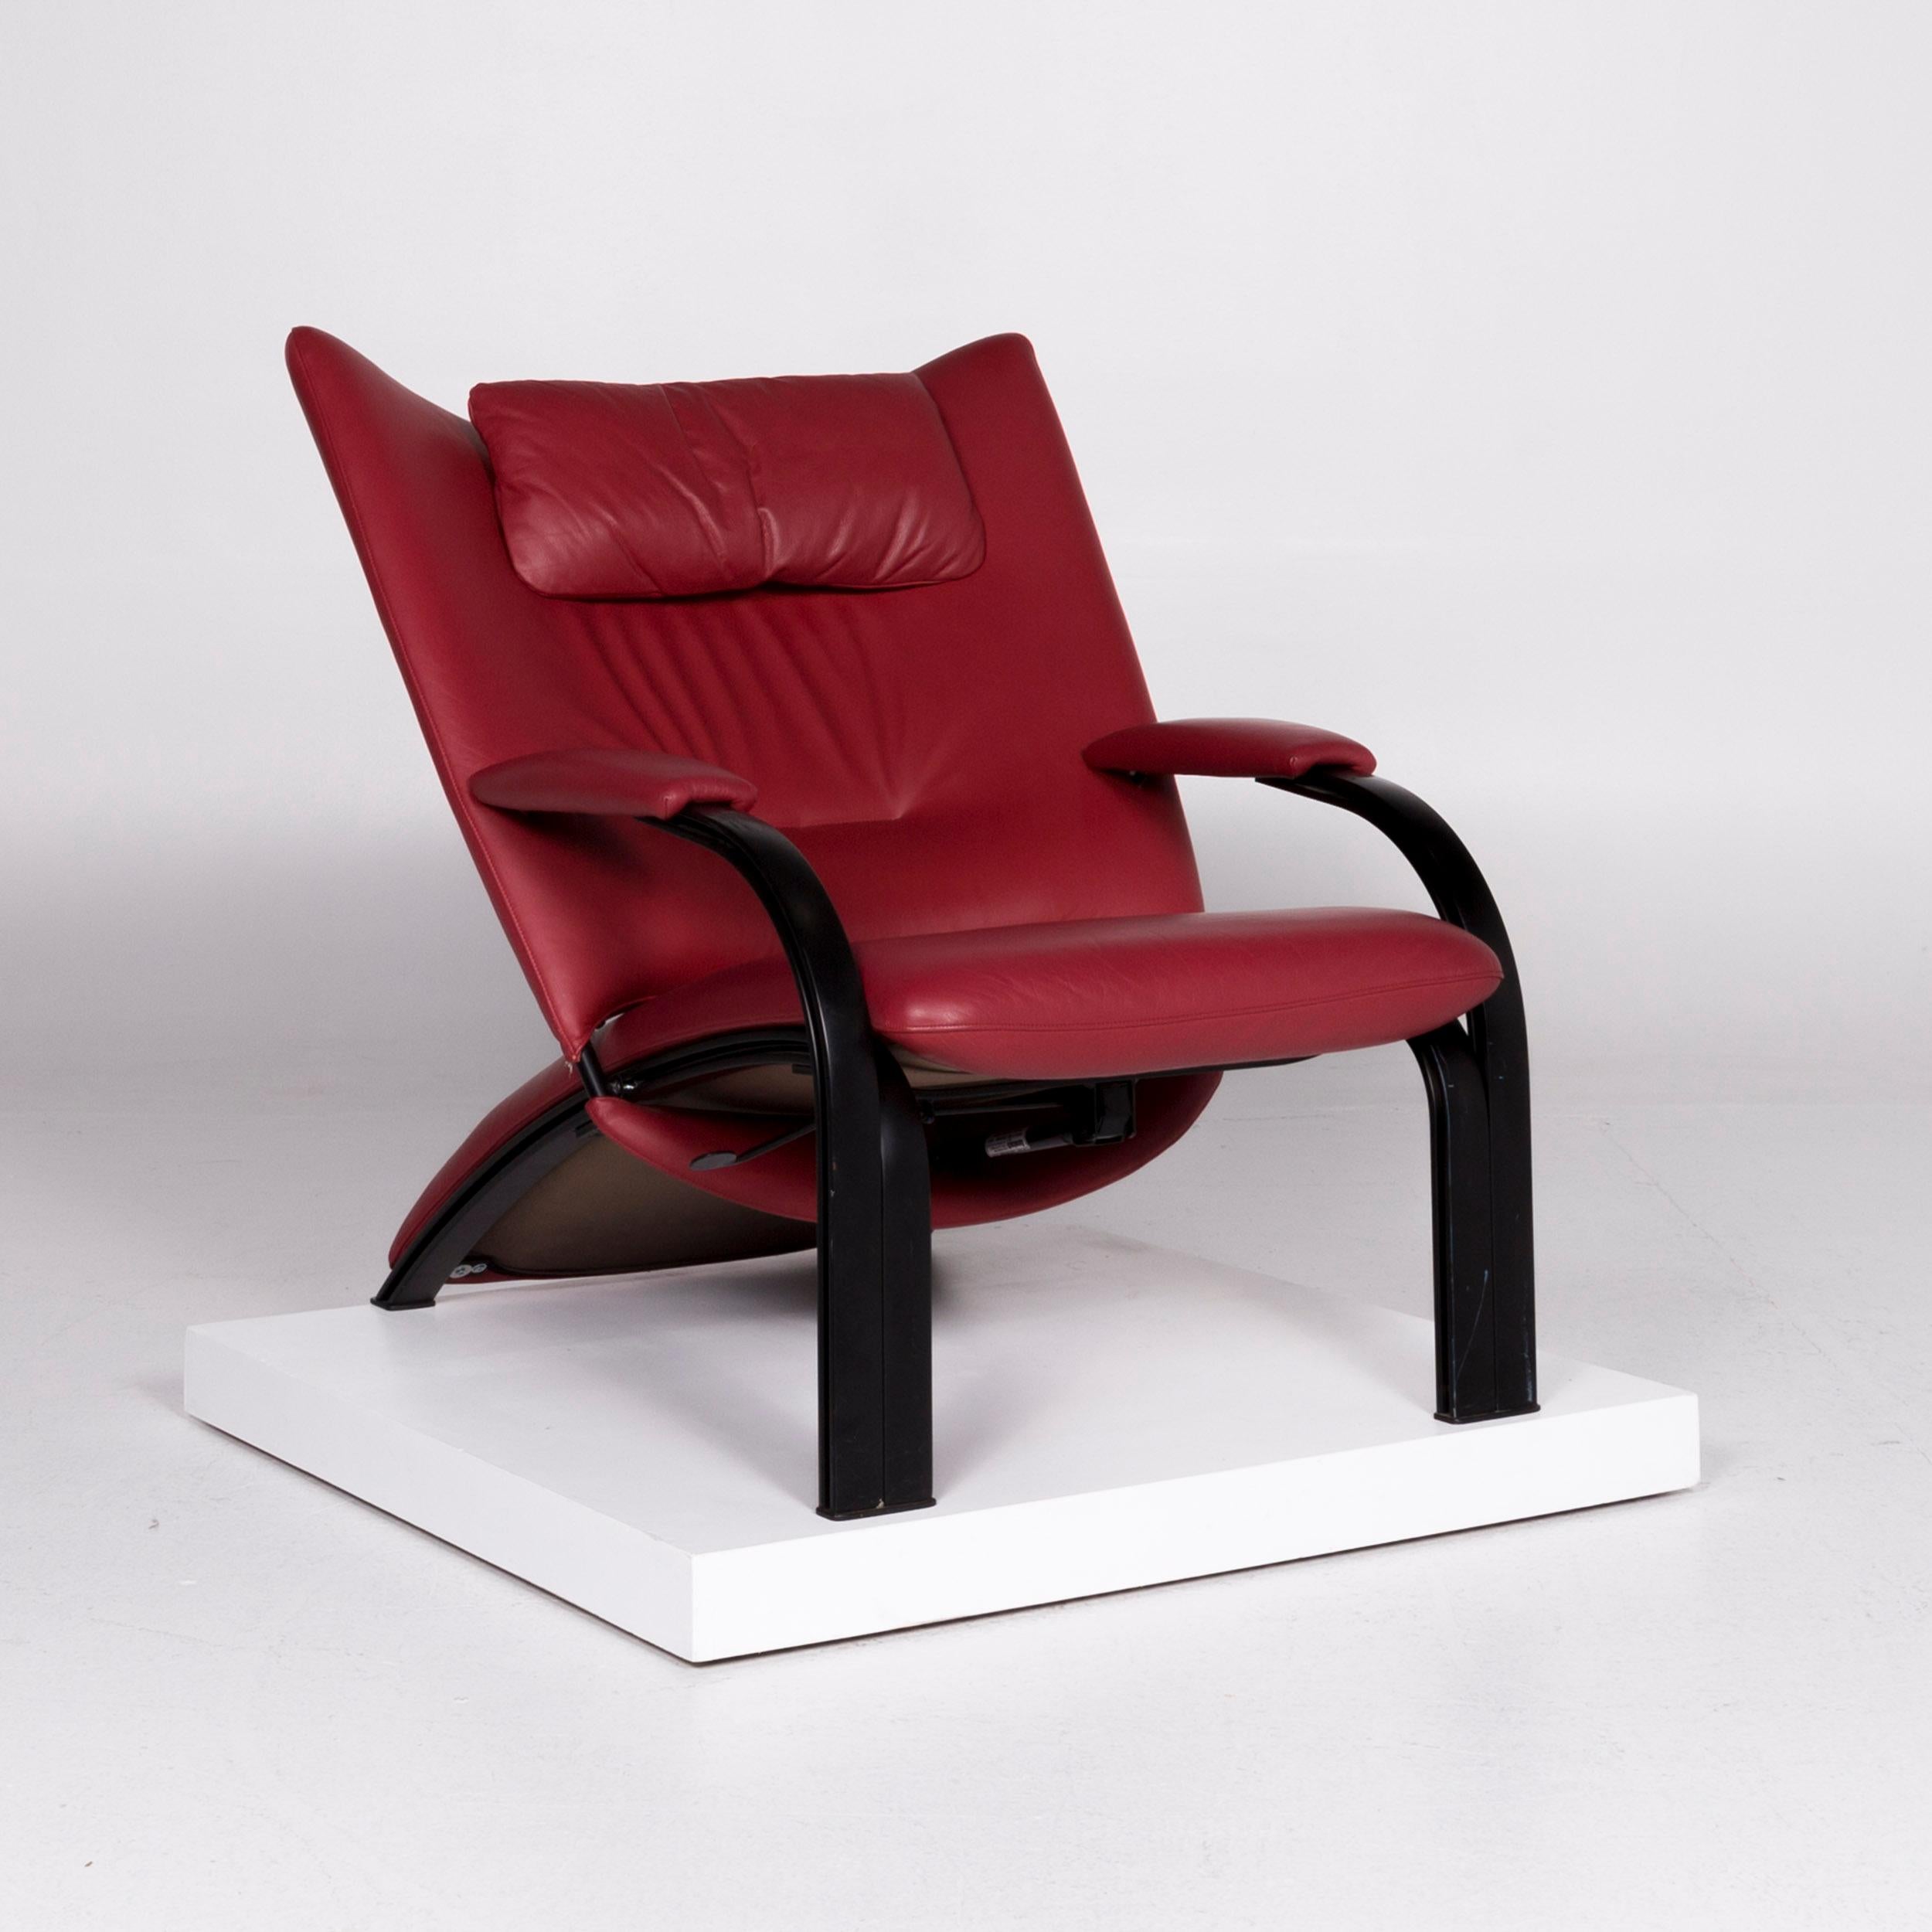 We bring to you a WK Wohnen Spot 698 leather armchair red.

 Product measurements in centimeters:
 
Depth 108
Width 82
Height 107
Seat-height 43
Rest-height 57
Seat-depth 54
Seat-width 54
Back-height 59.
  